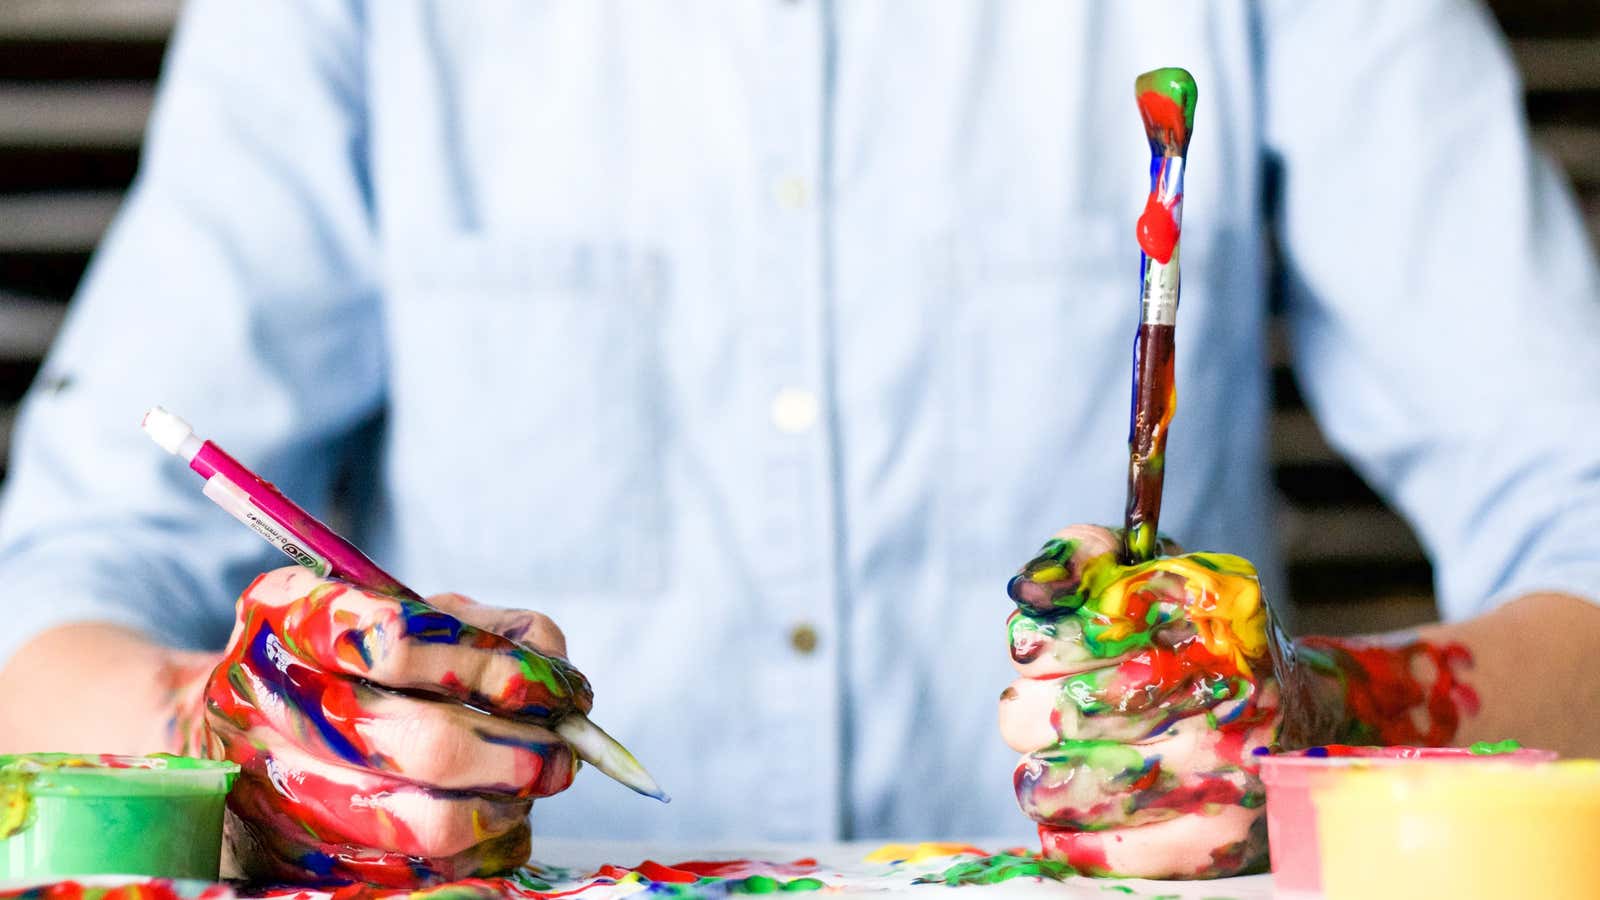 Creativity without mastery is often messy.